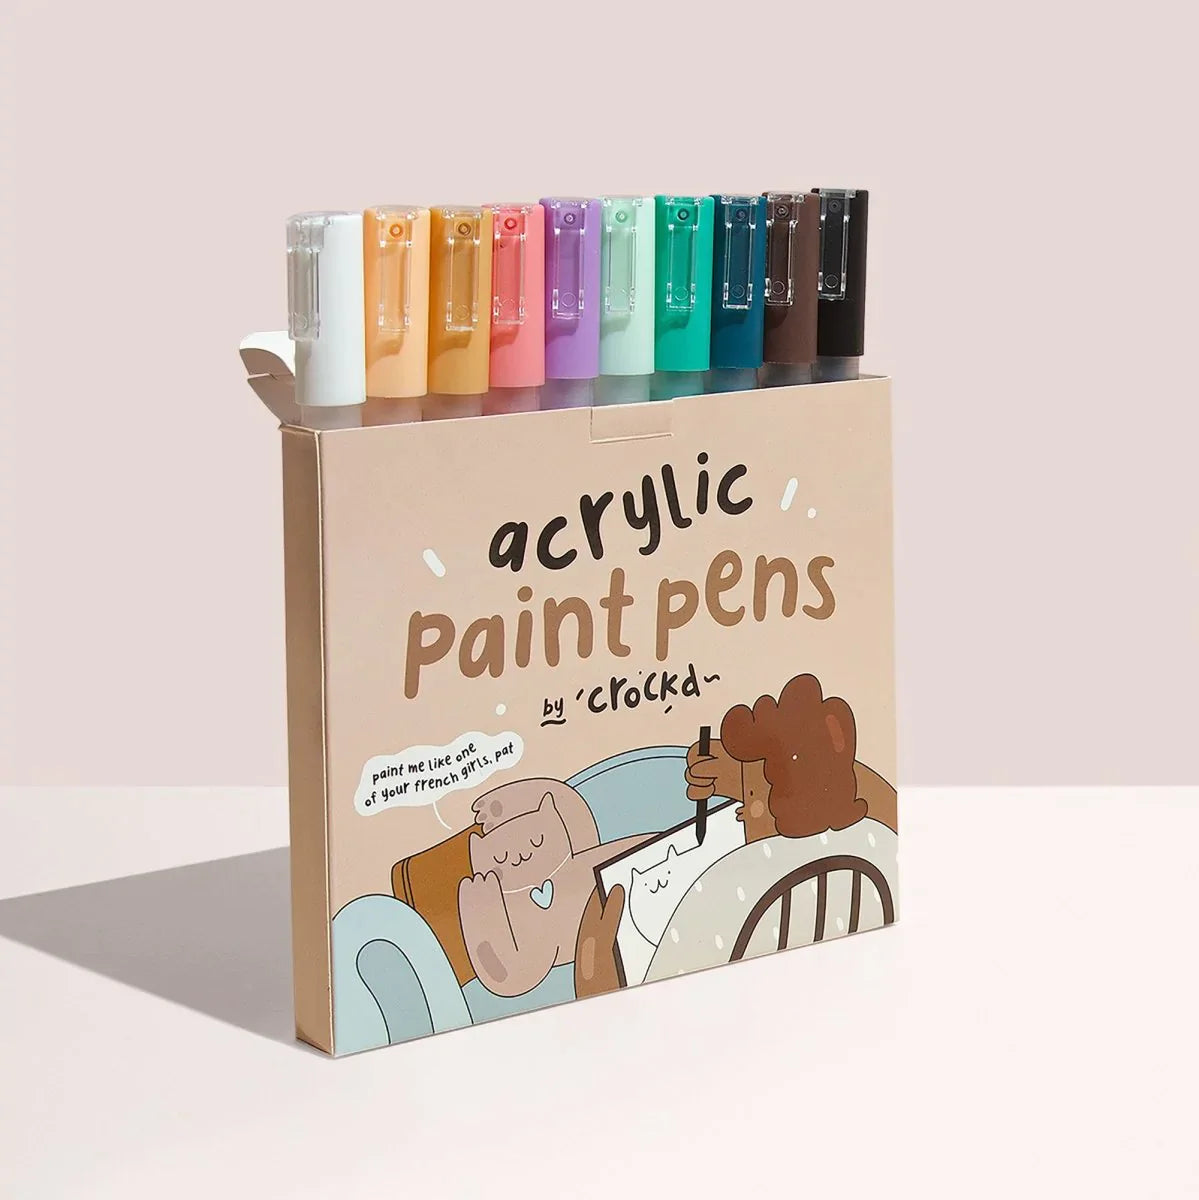 Acrylic Paint Pens by Crockd featured product shot